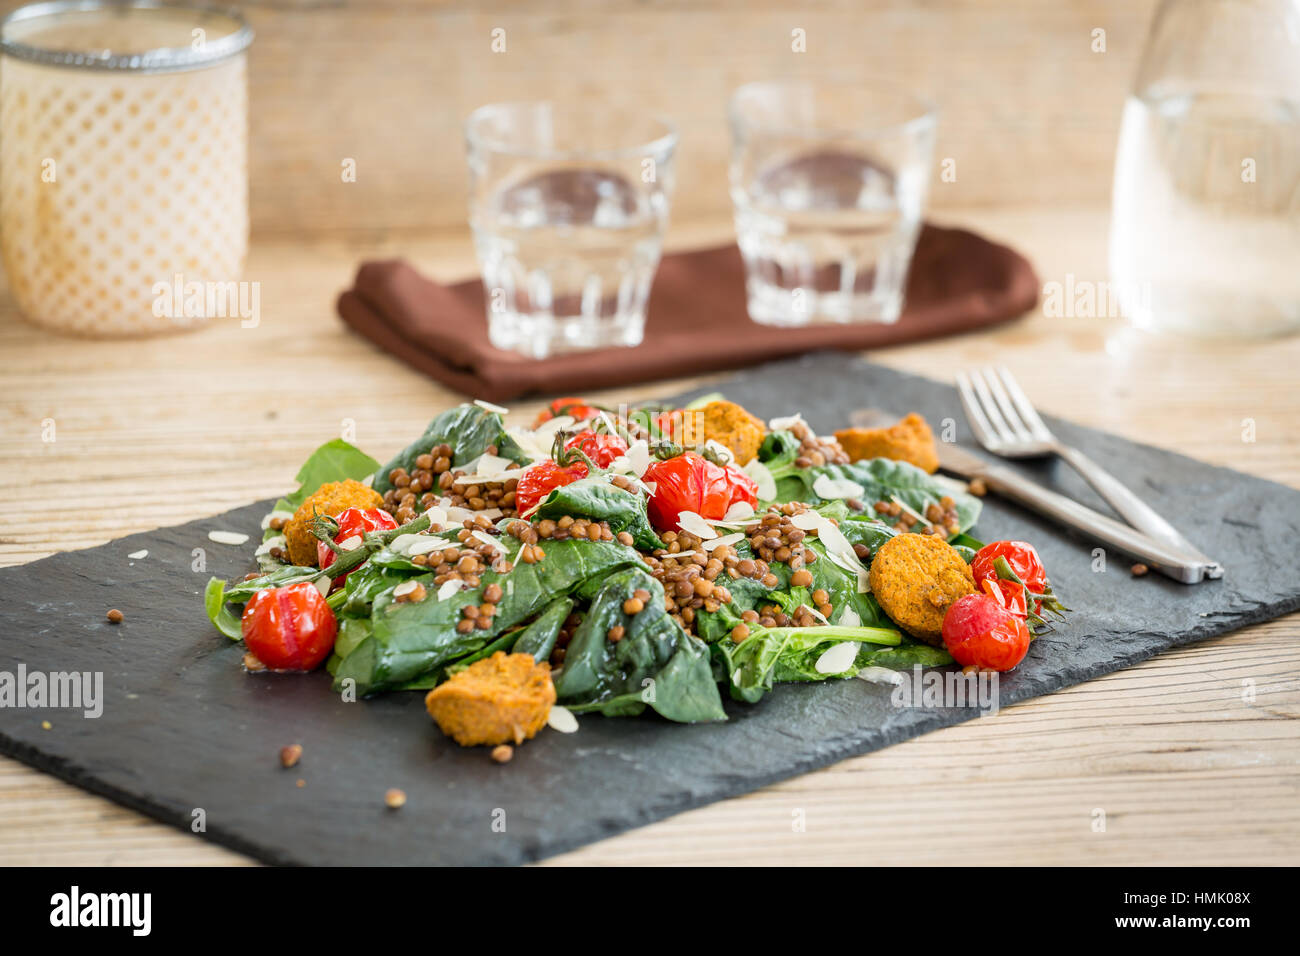 Salad with falafel, lentils and baked tomato served on stone plate Stock Photo